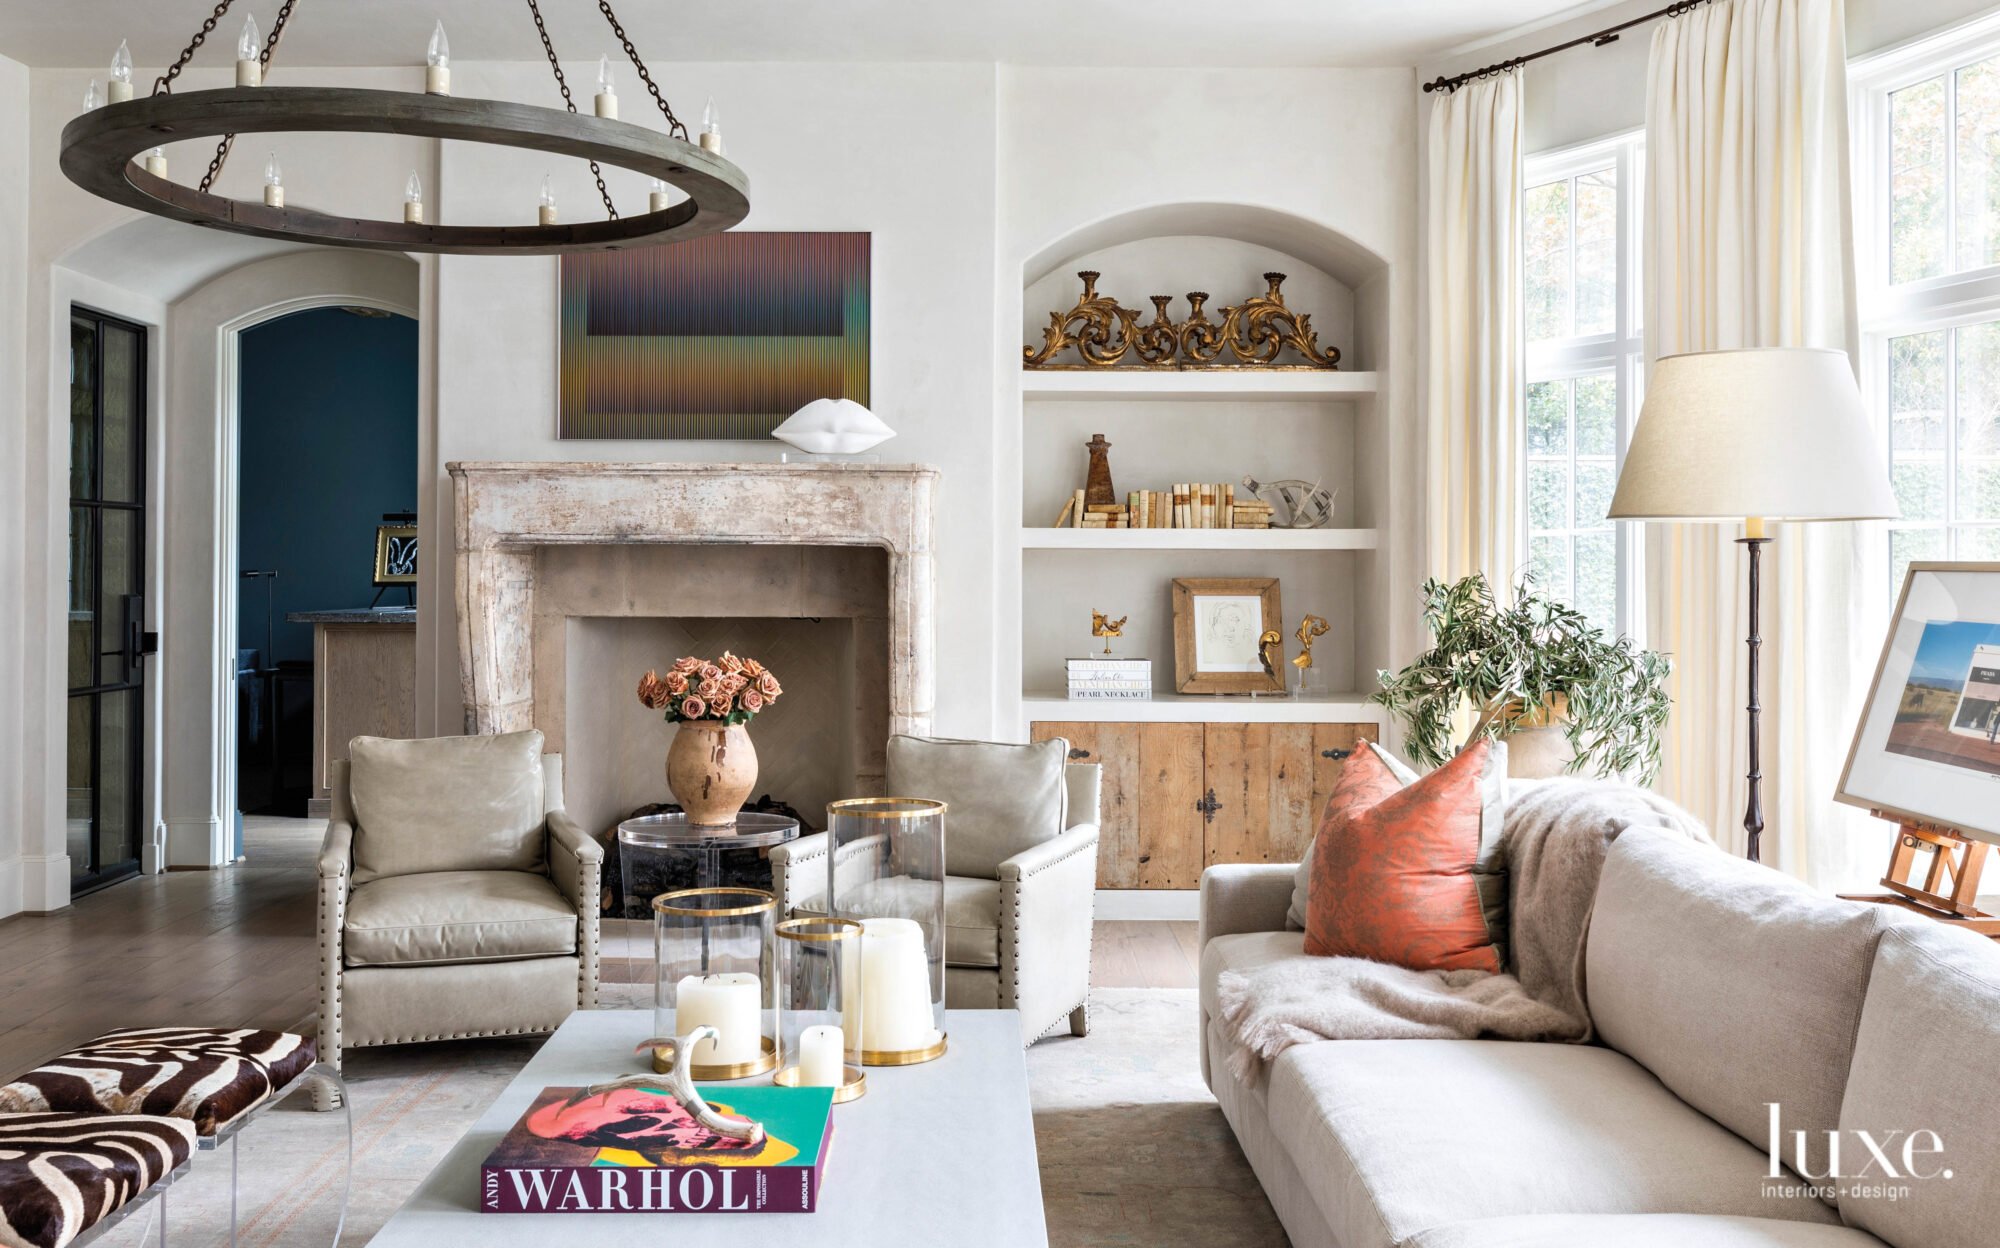 Great room with neutral furnishings and colorful accents and art.